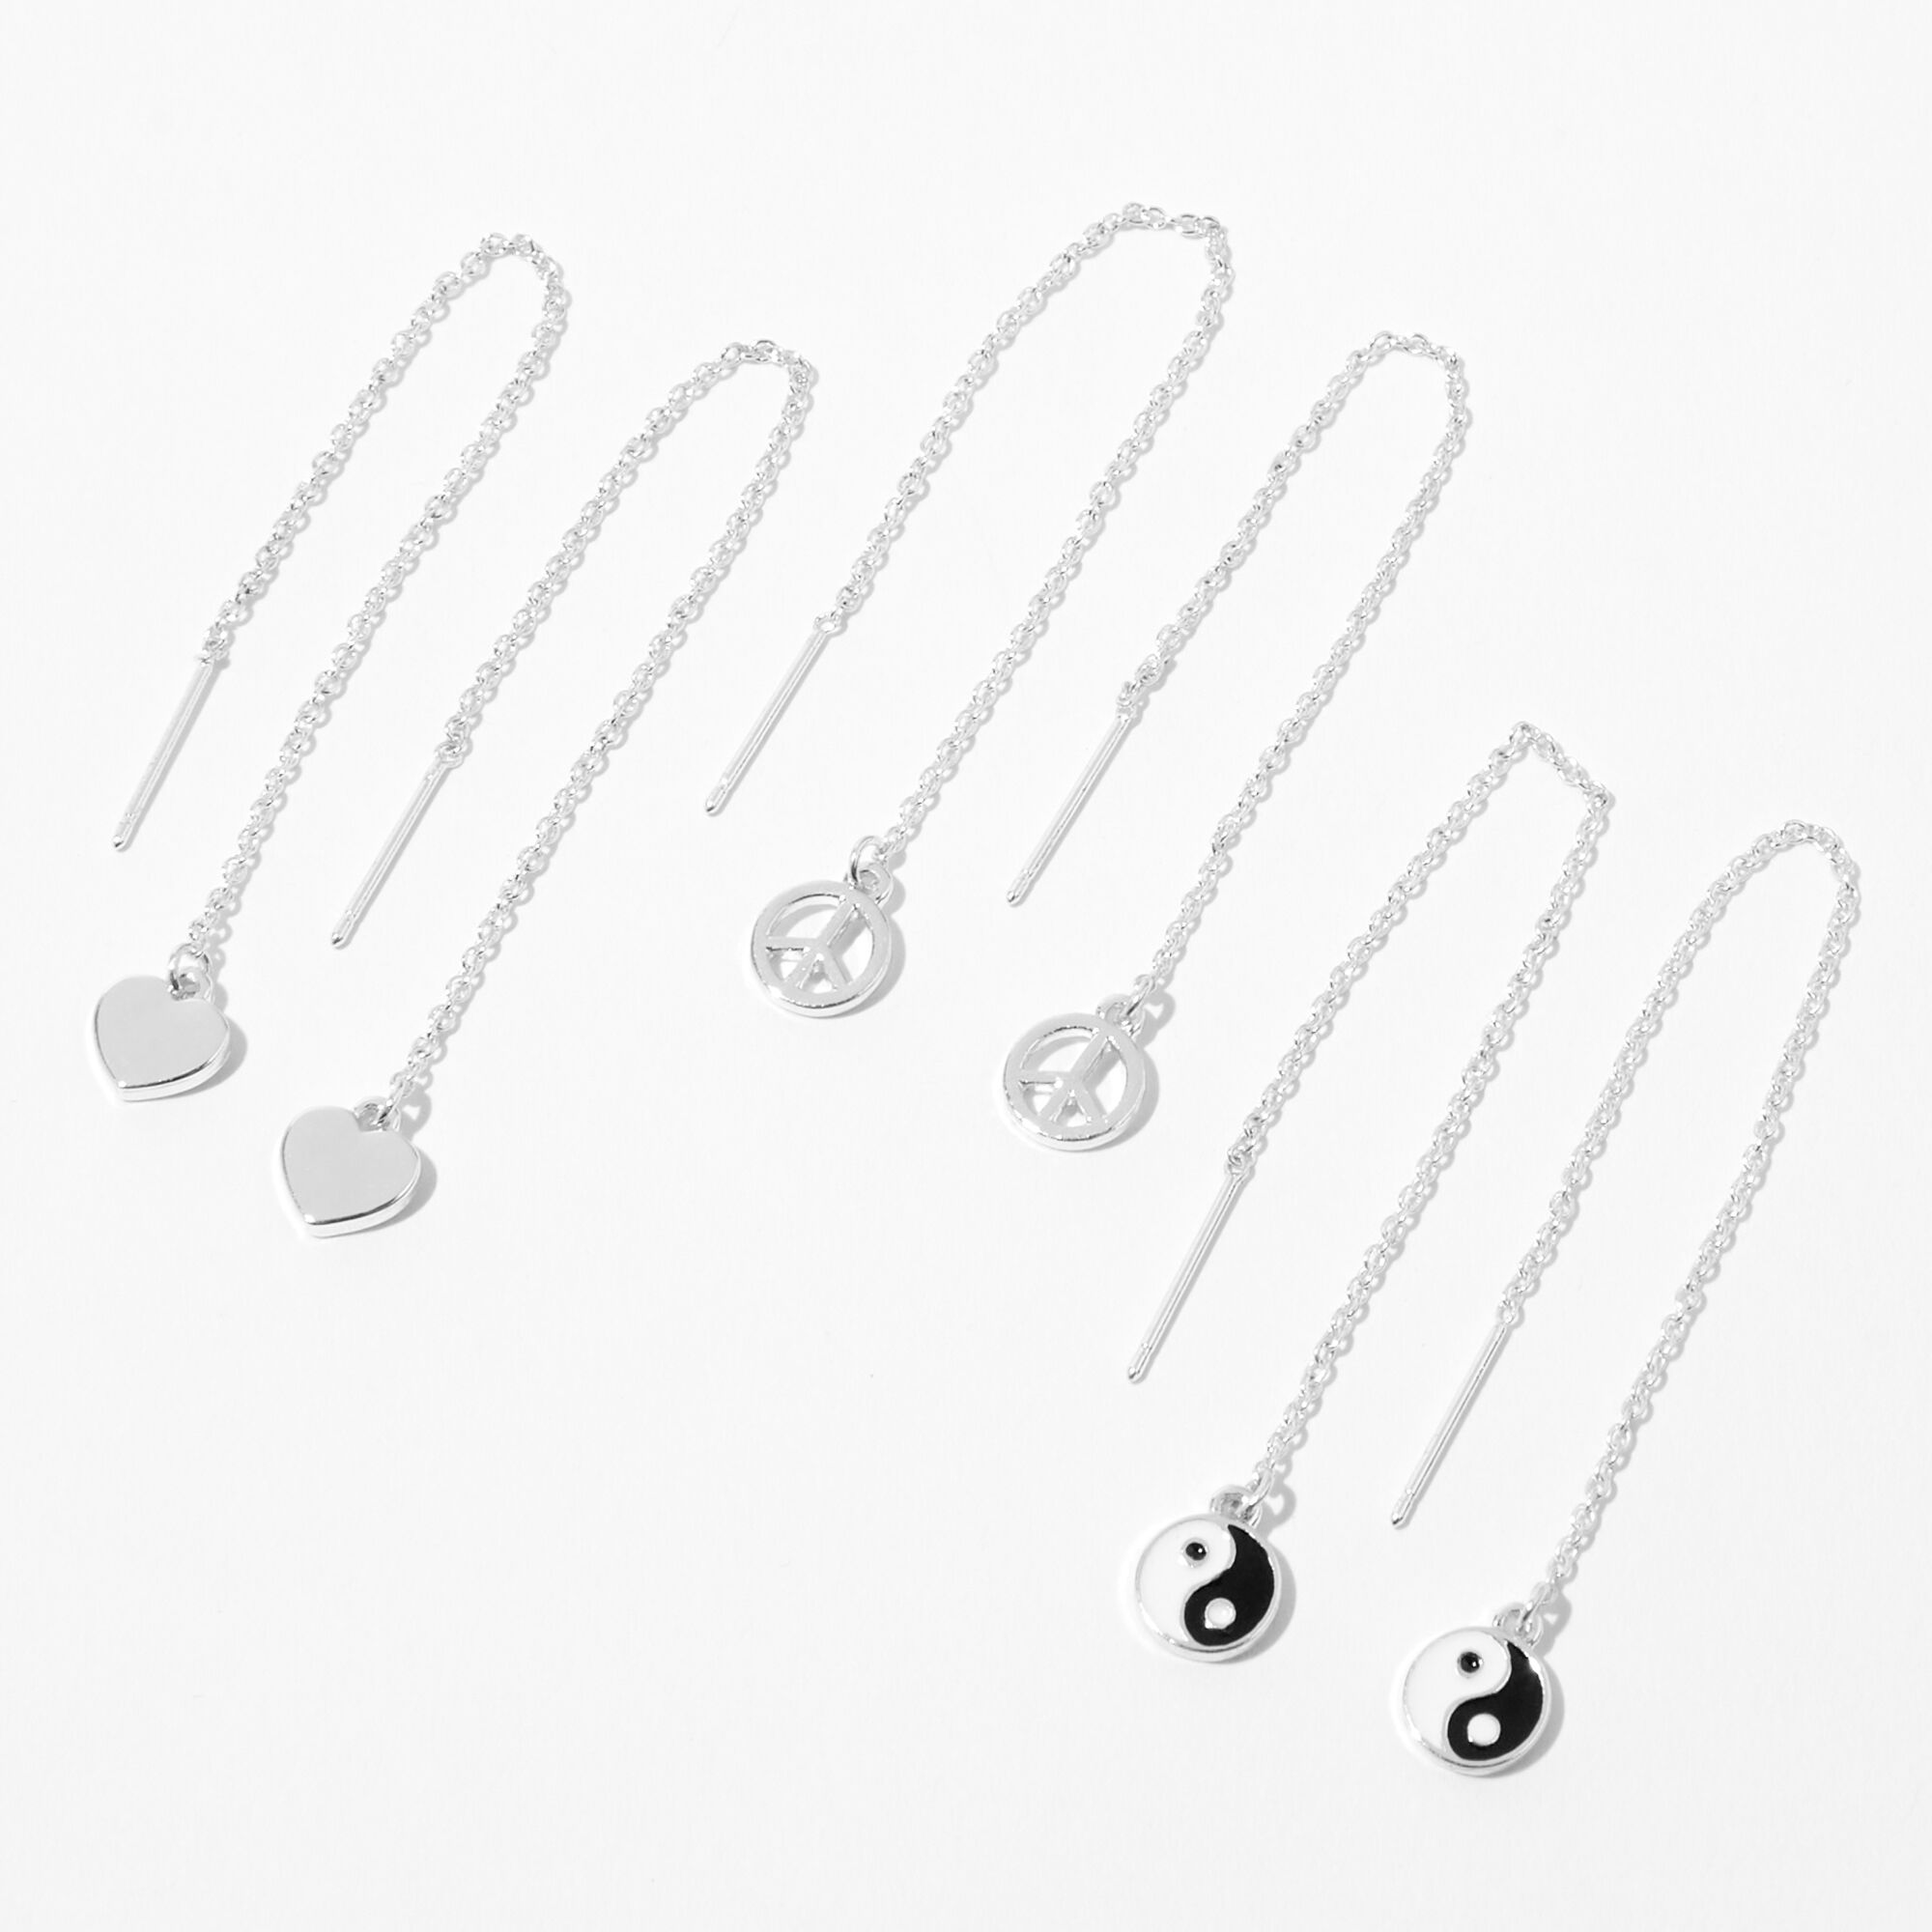 View Claires Tone 3 Heart Icon Threader Drop Earrings 3 Pack Silver information